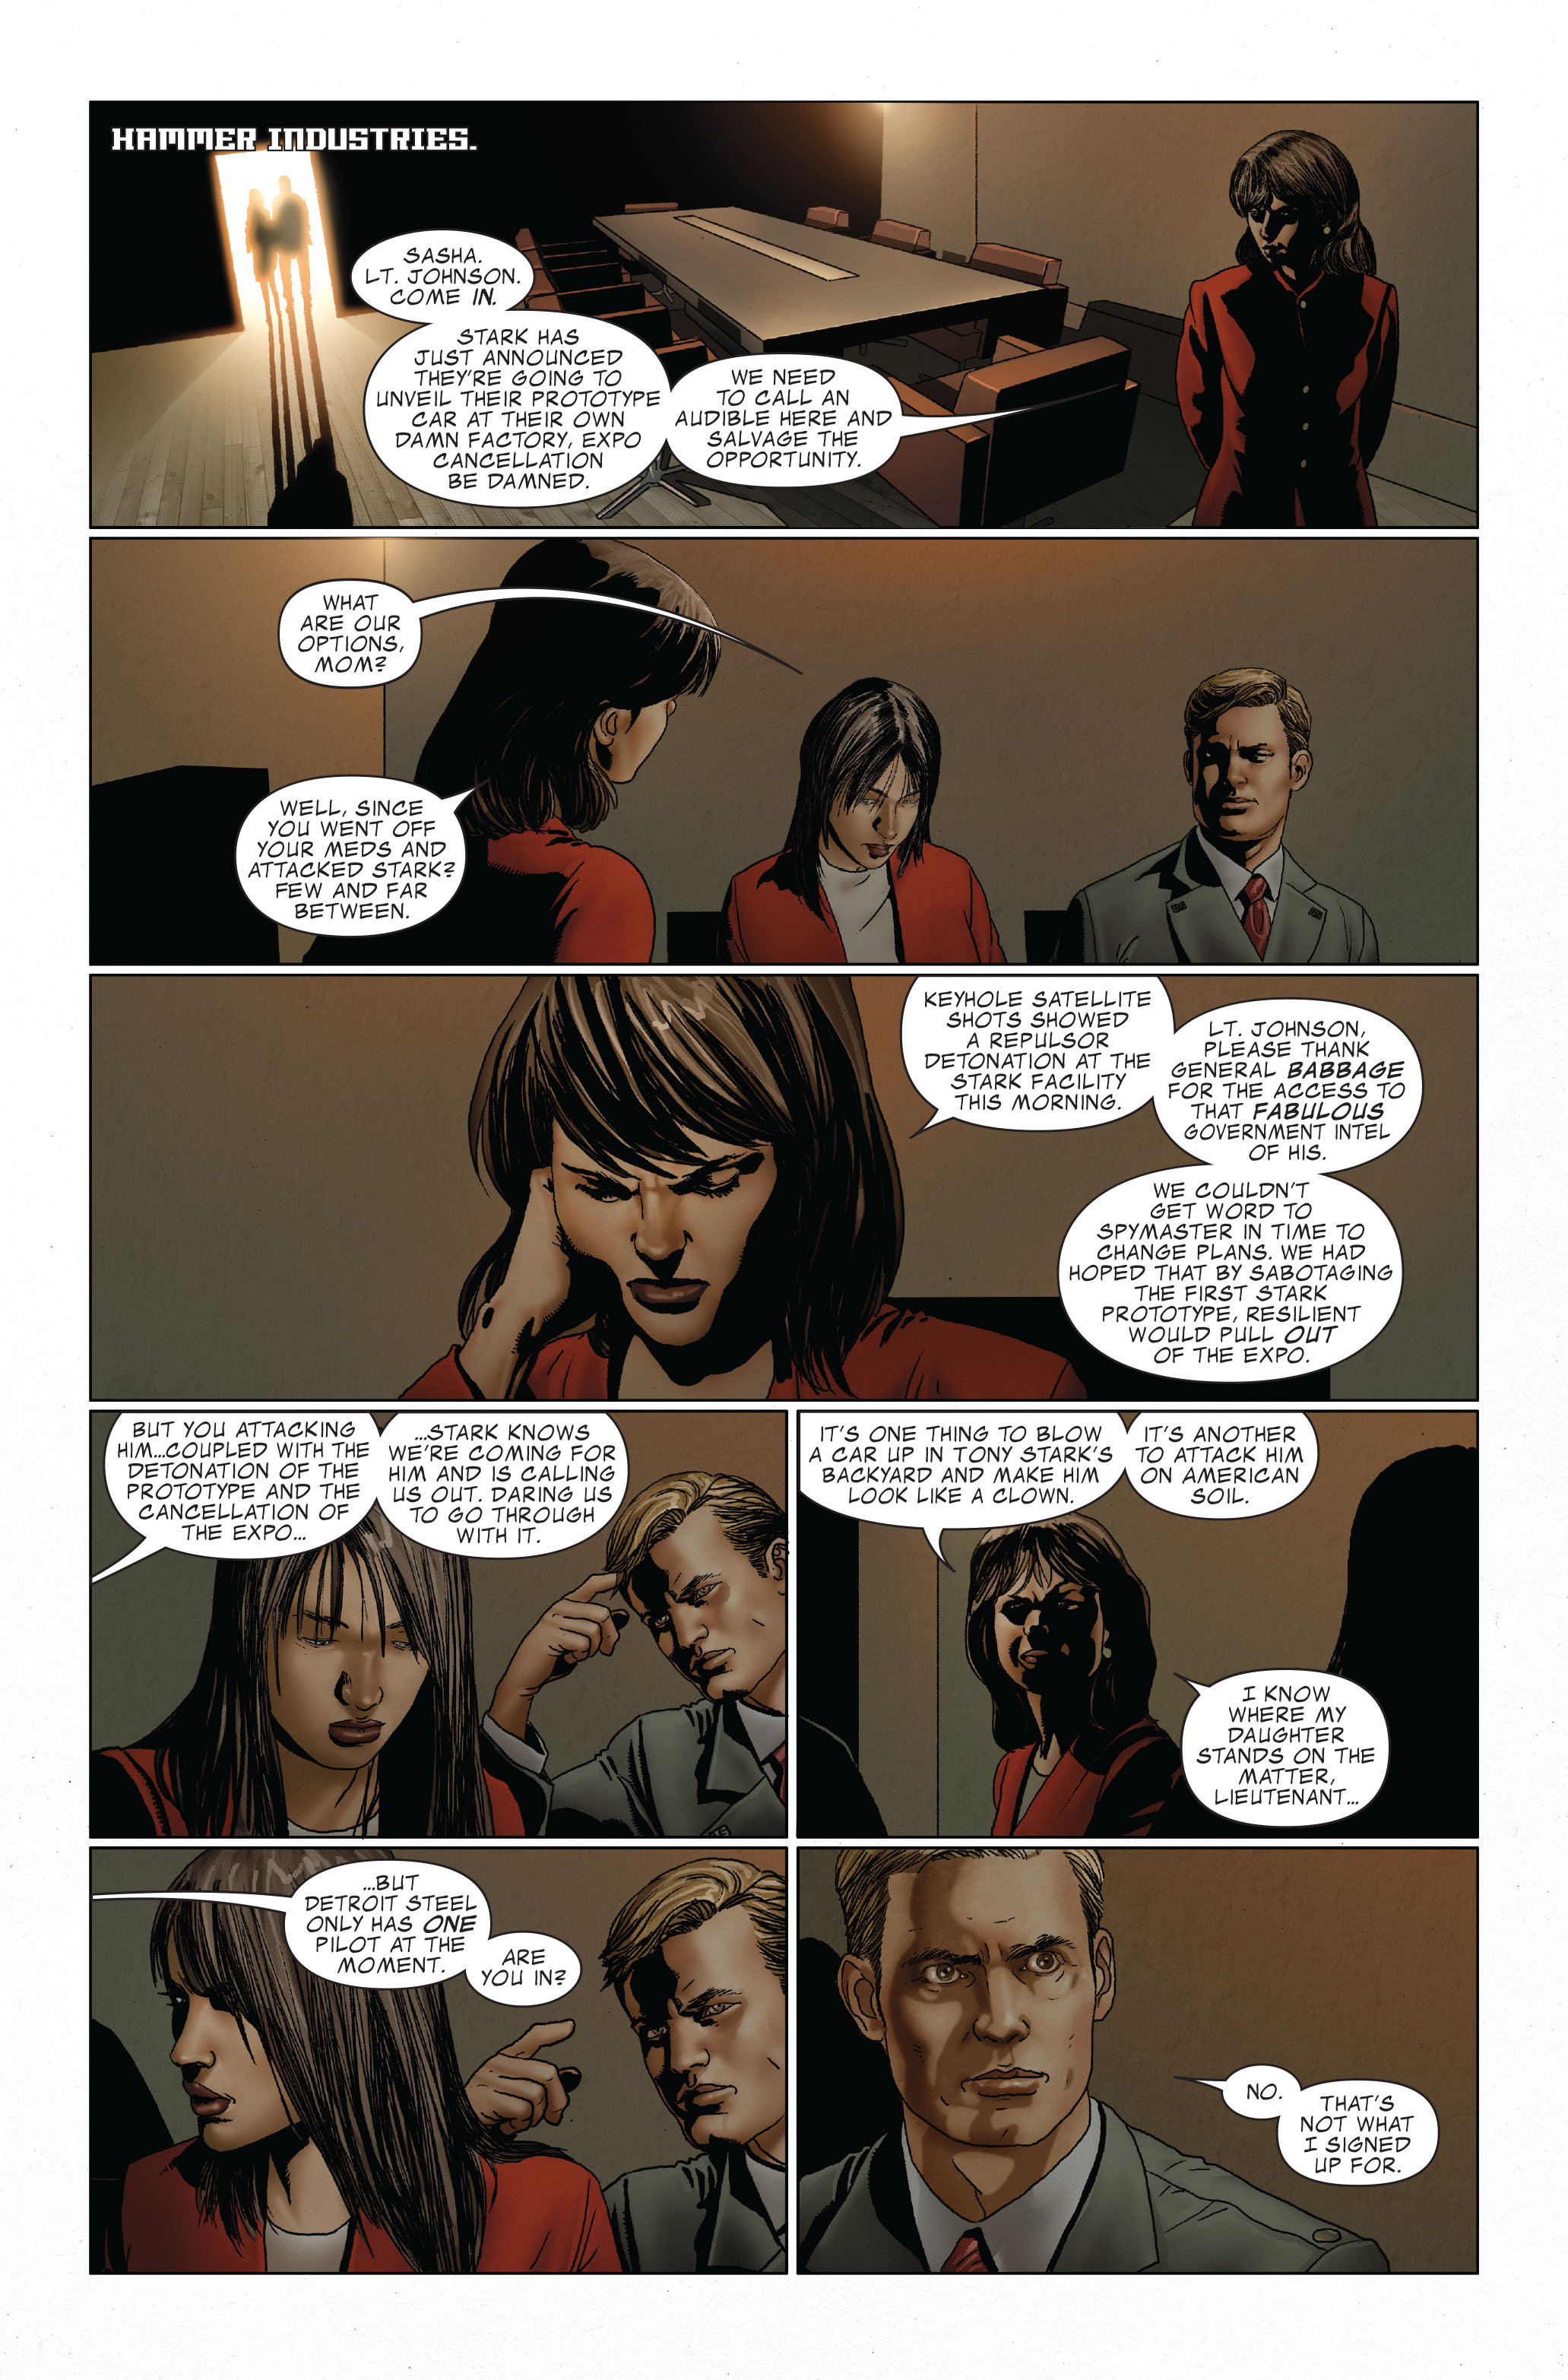 Invincible Iron Man (2008) 31 Page 10